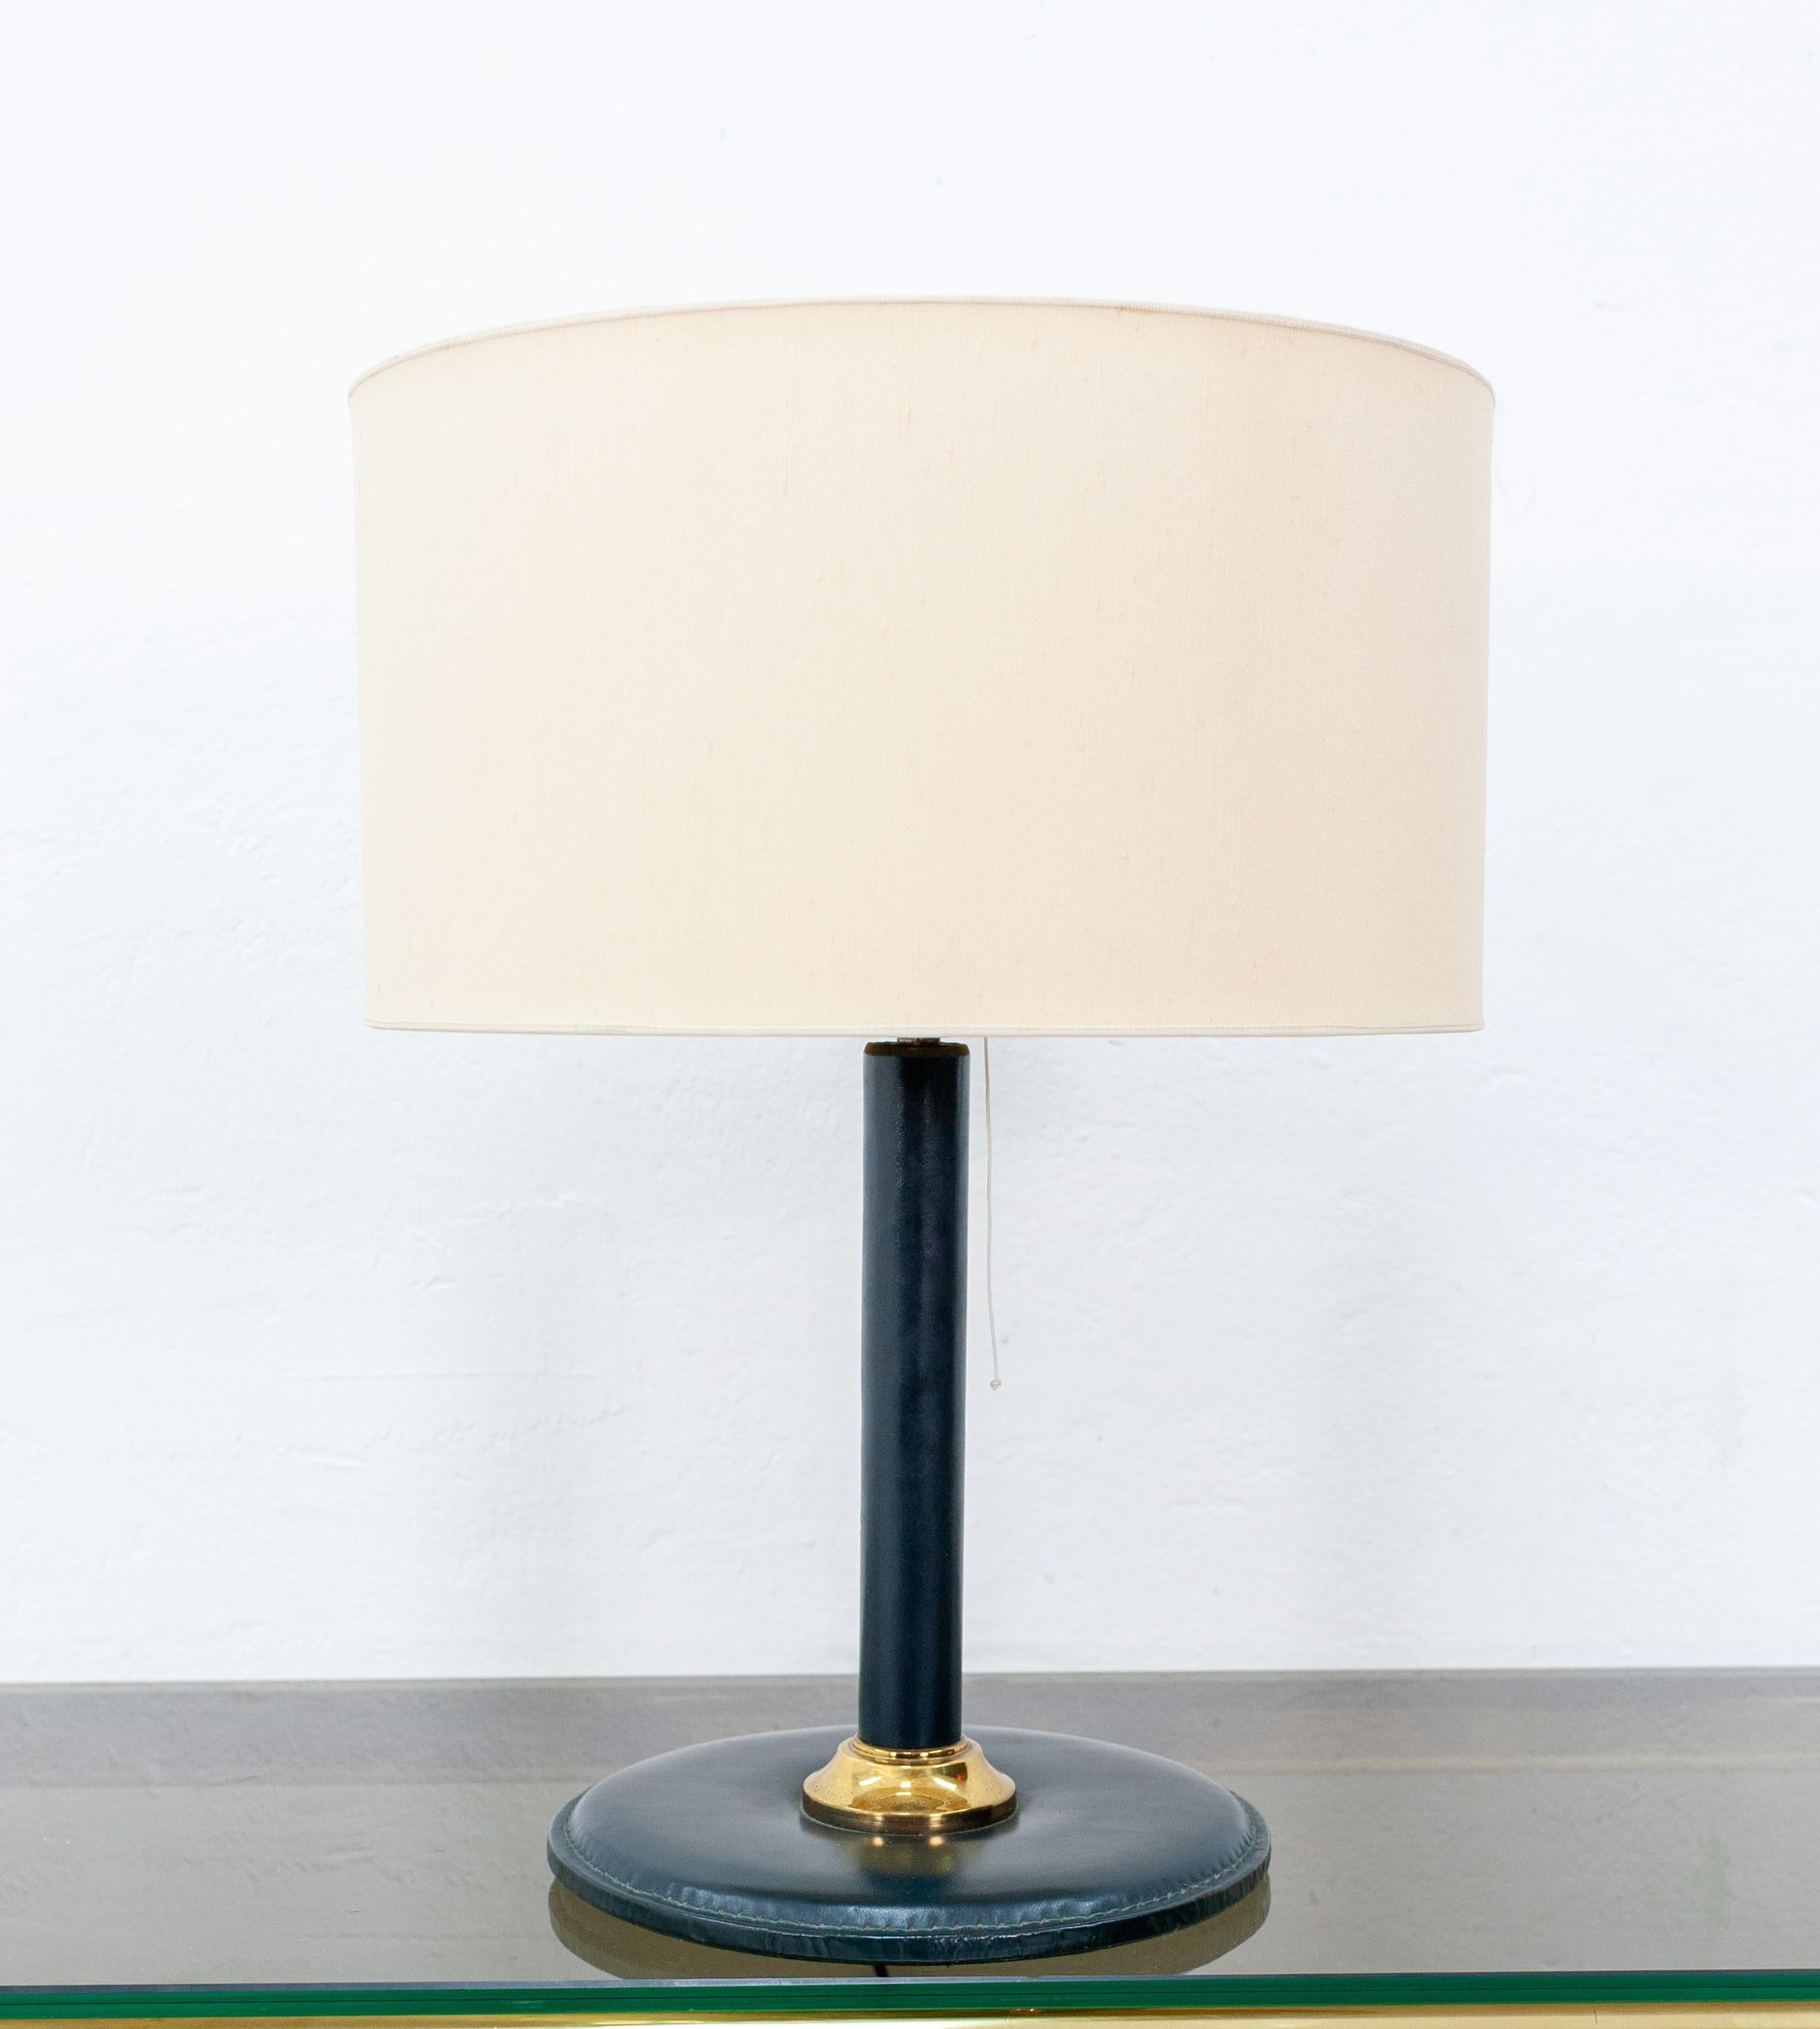 Beautiful forest green stitched leather table lamp. Attributed to Jacques Adnet. France 1960s. 
Still with its original closed top leather lampshade in a cream colored fabric. Recently rewired with a pull switch and a new armature.
There is some